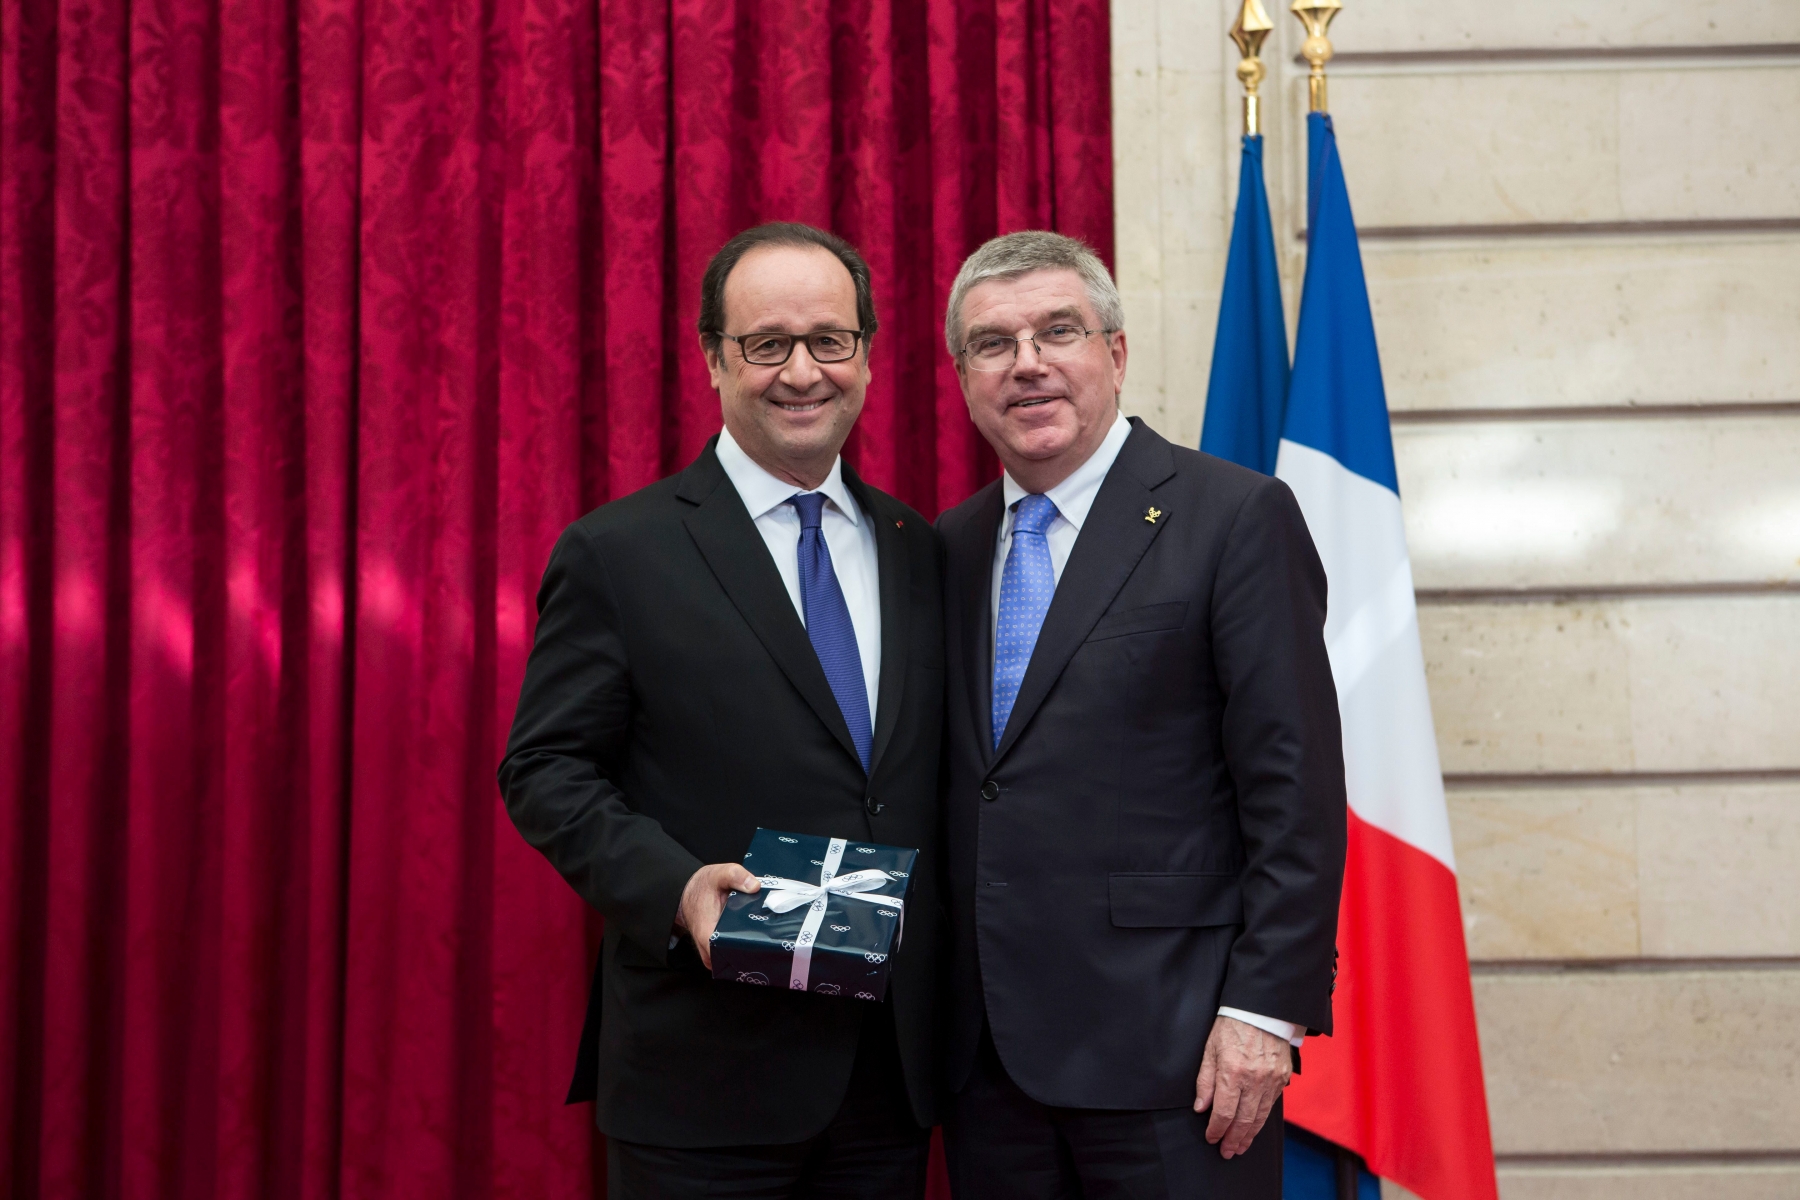 French President Francois Hollande, left, receives a gift from International Olympic Committee President Thomas Bach during a meeting at the Elysee Palace in Paris, Sunday, Oct. 2, 2016. Paris, which last hosted the Olympics in 1924, is competing against Budapest, Rome and Los Angeles for the games. (AP Photo/Kamil Zihnioglu, Pool) France Paris 2024